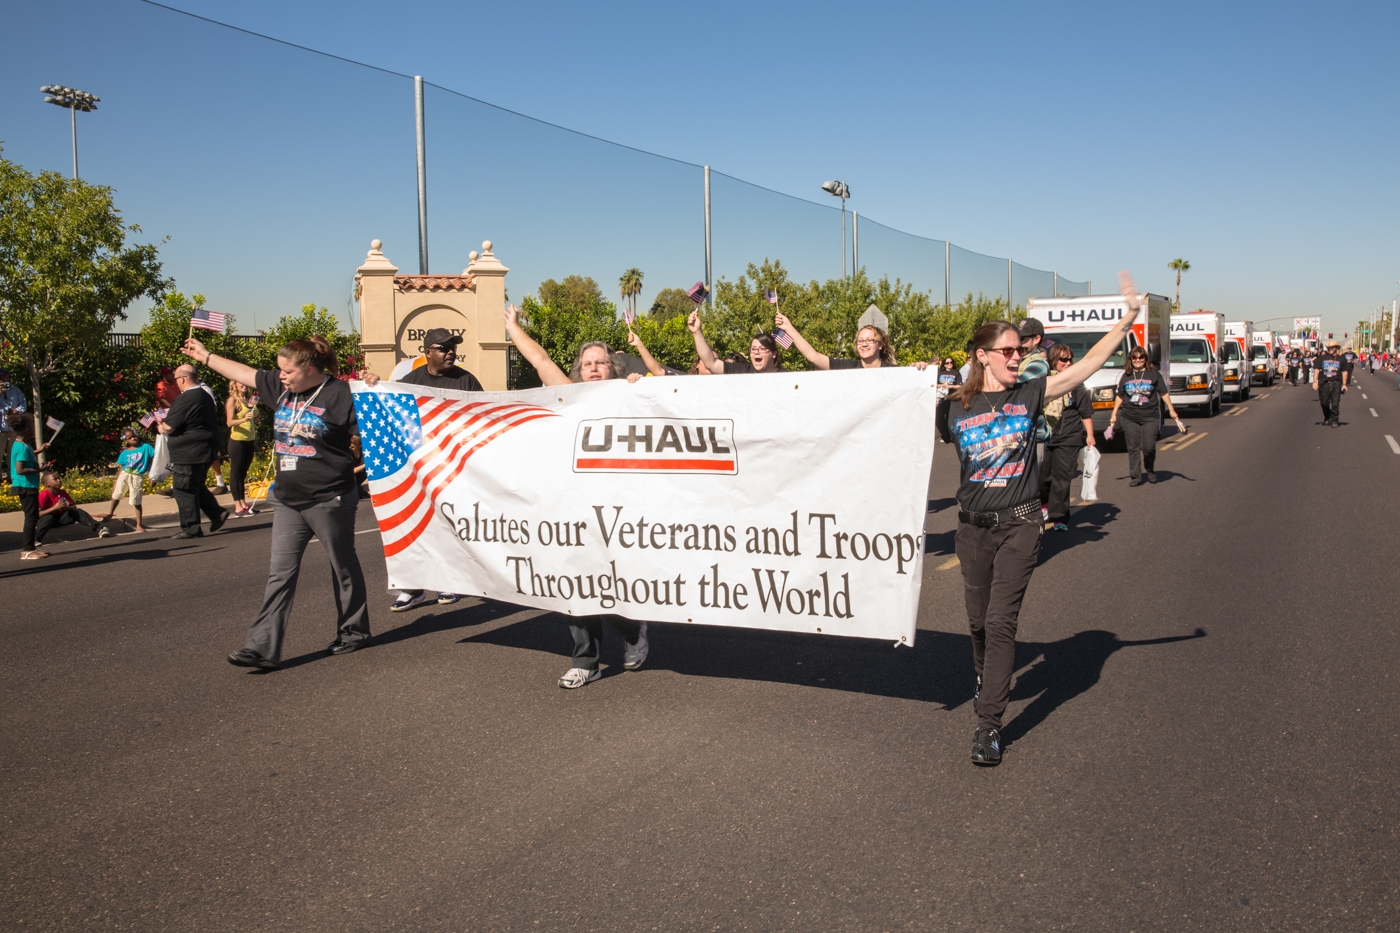 Supporting Veterans: U-Haul to Sponsor Freedom Team at Hope & Possibility 4M Race